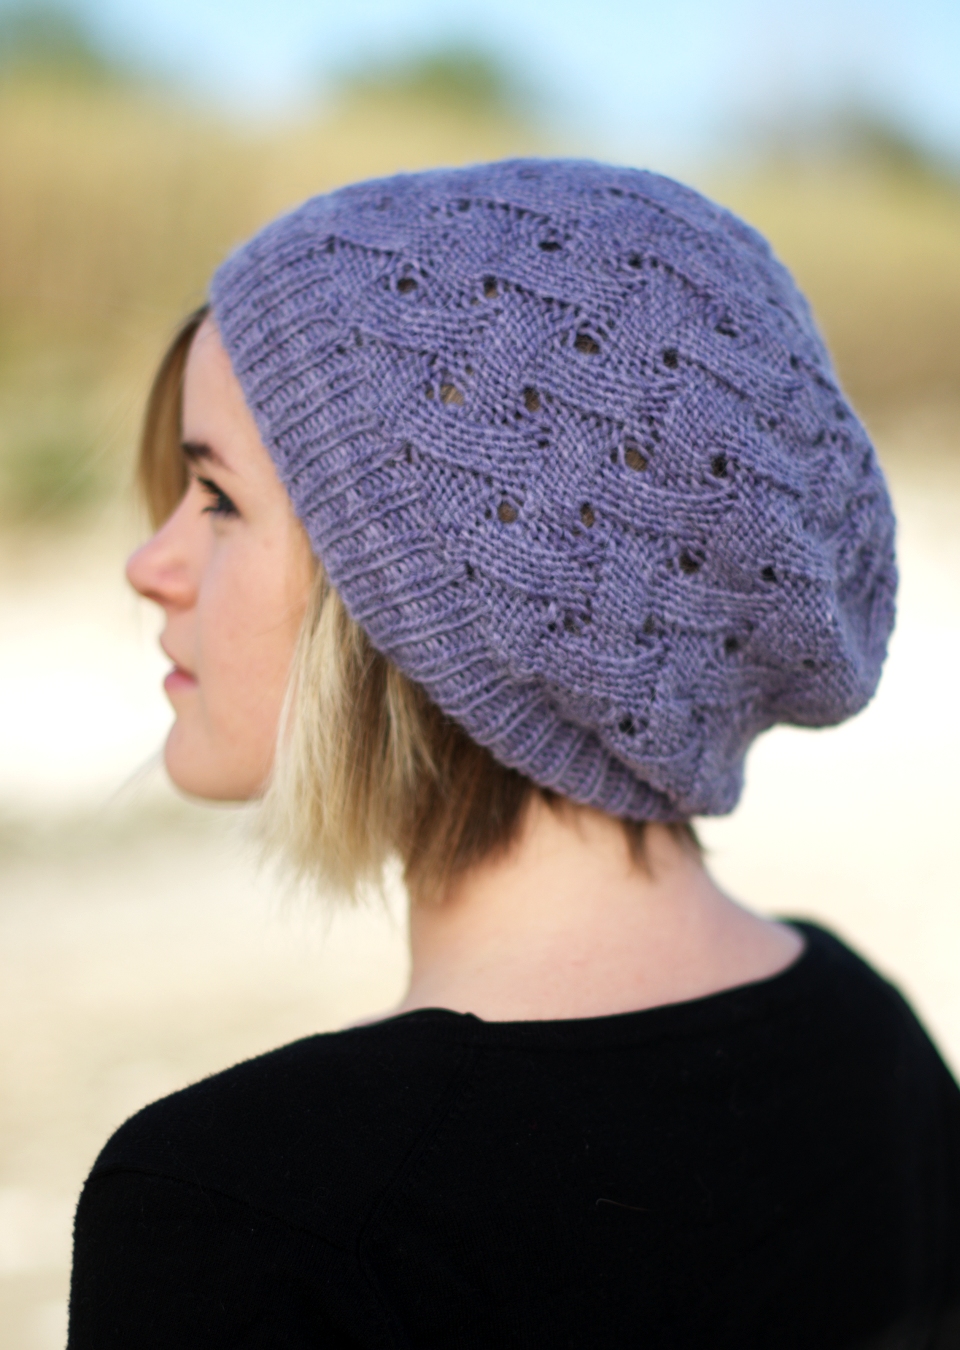 knitting patterns for hats ql slouch reversible slouchy lace hat knitting pattern uktitps